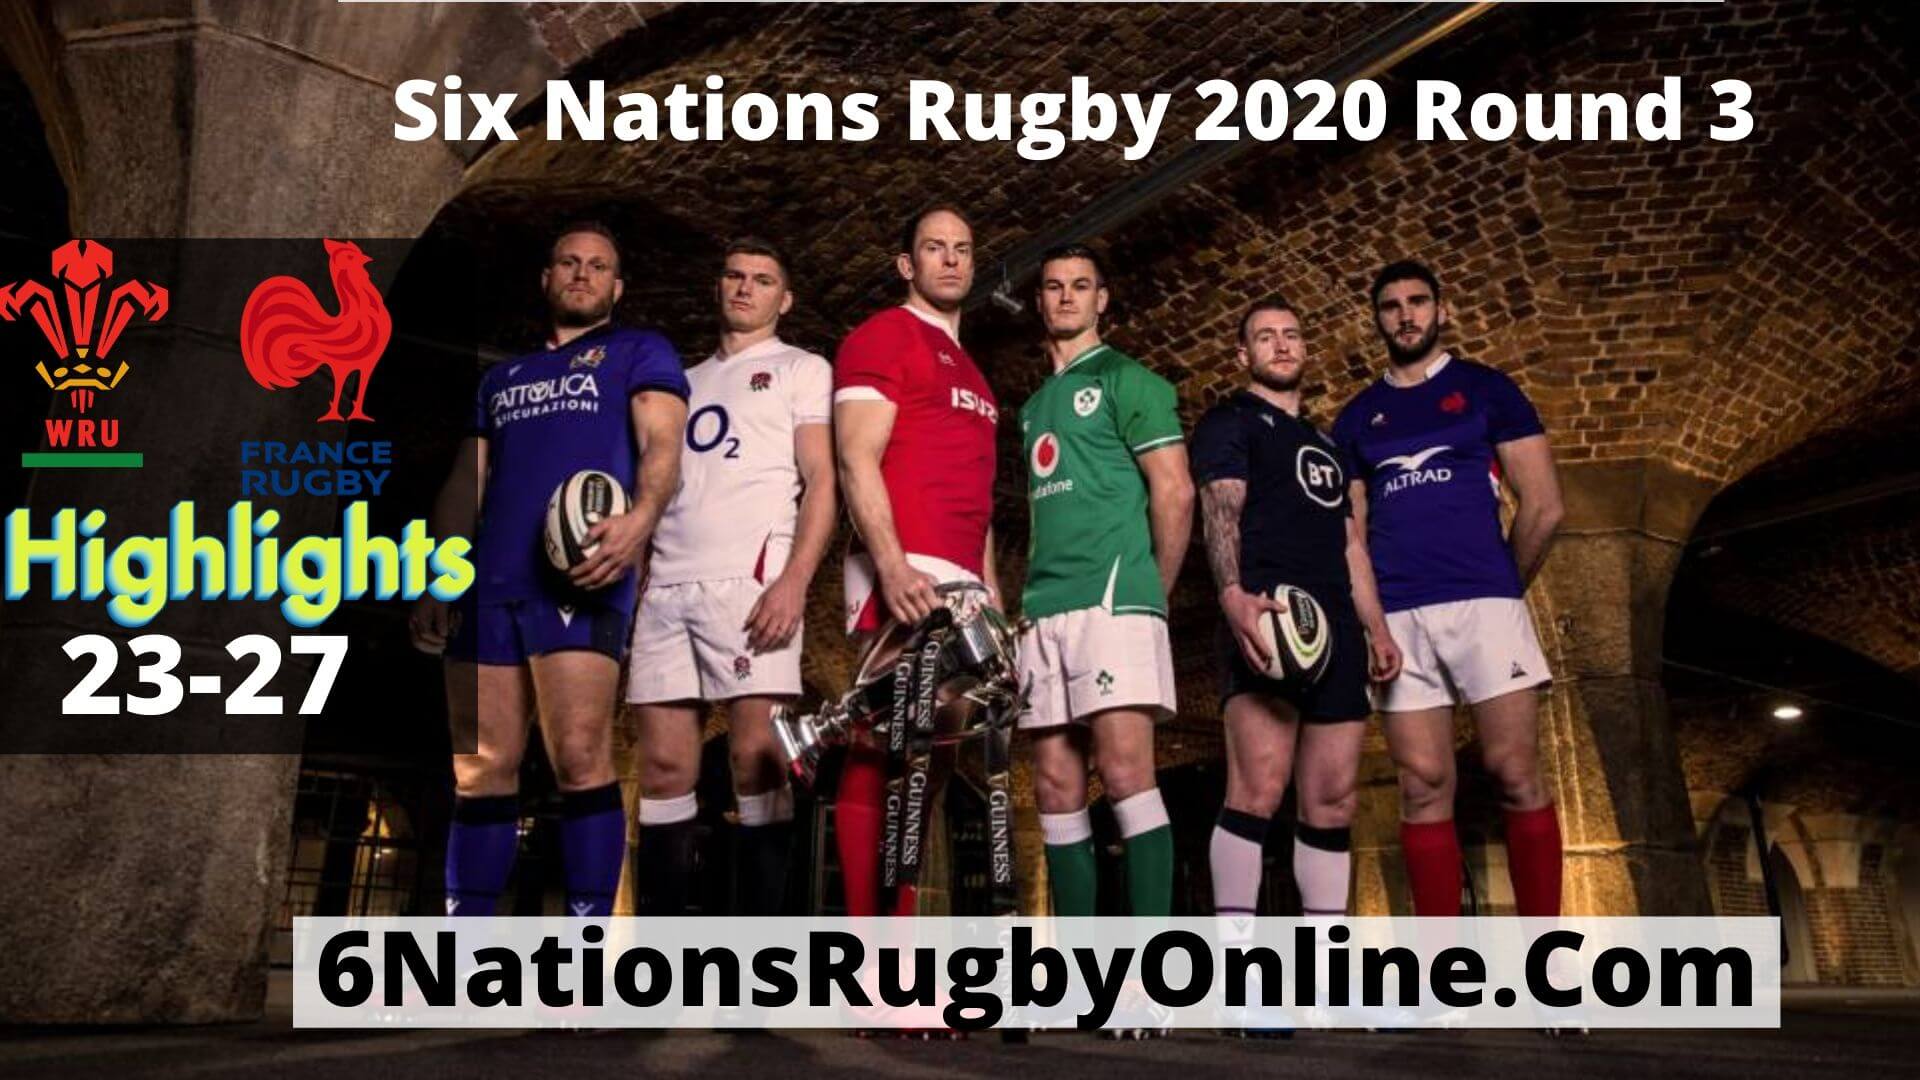 Wales Vs France Highlights 2020 Rd 3 Six Nations Rugby